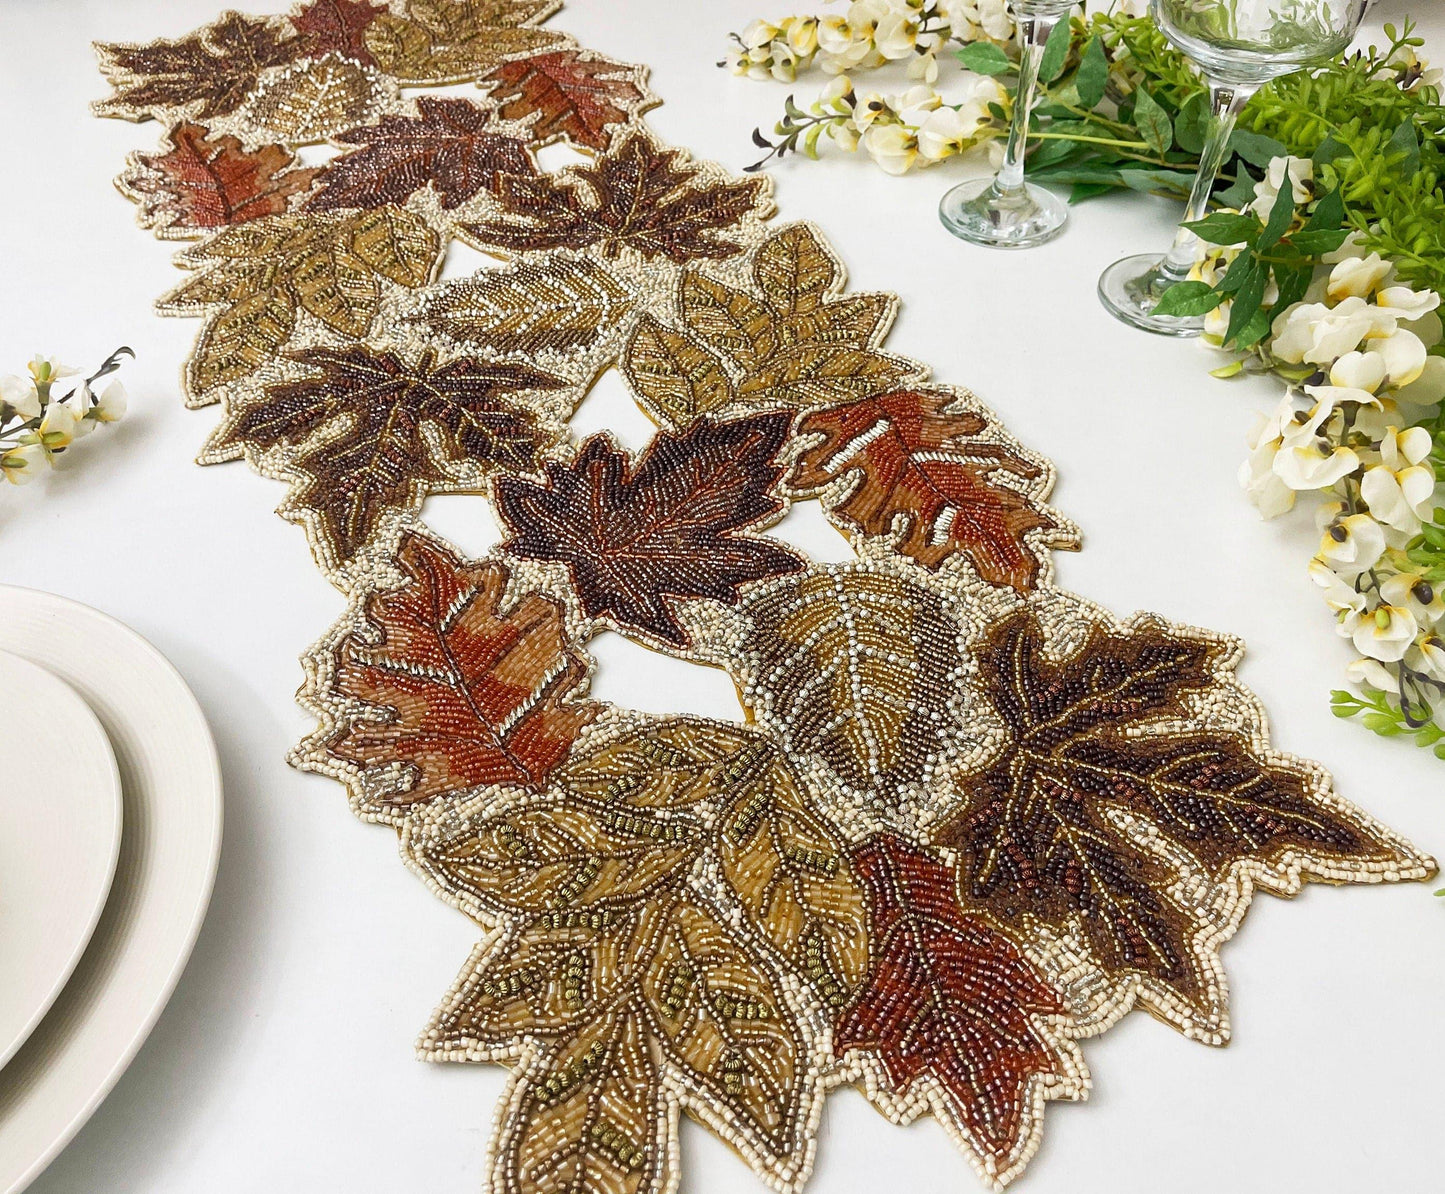 Fall Maple Leaf Beaded Table Runner - MAIA HOMES